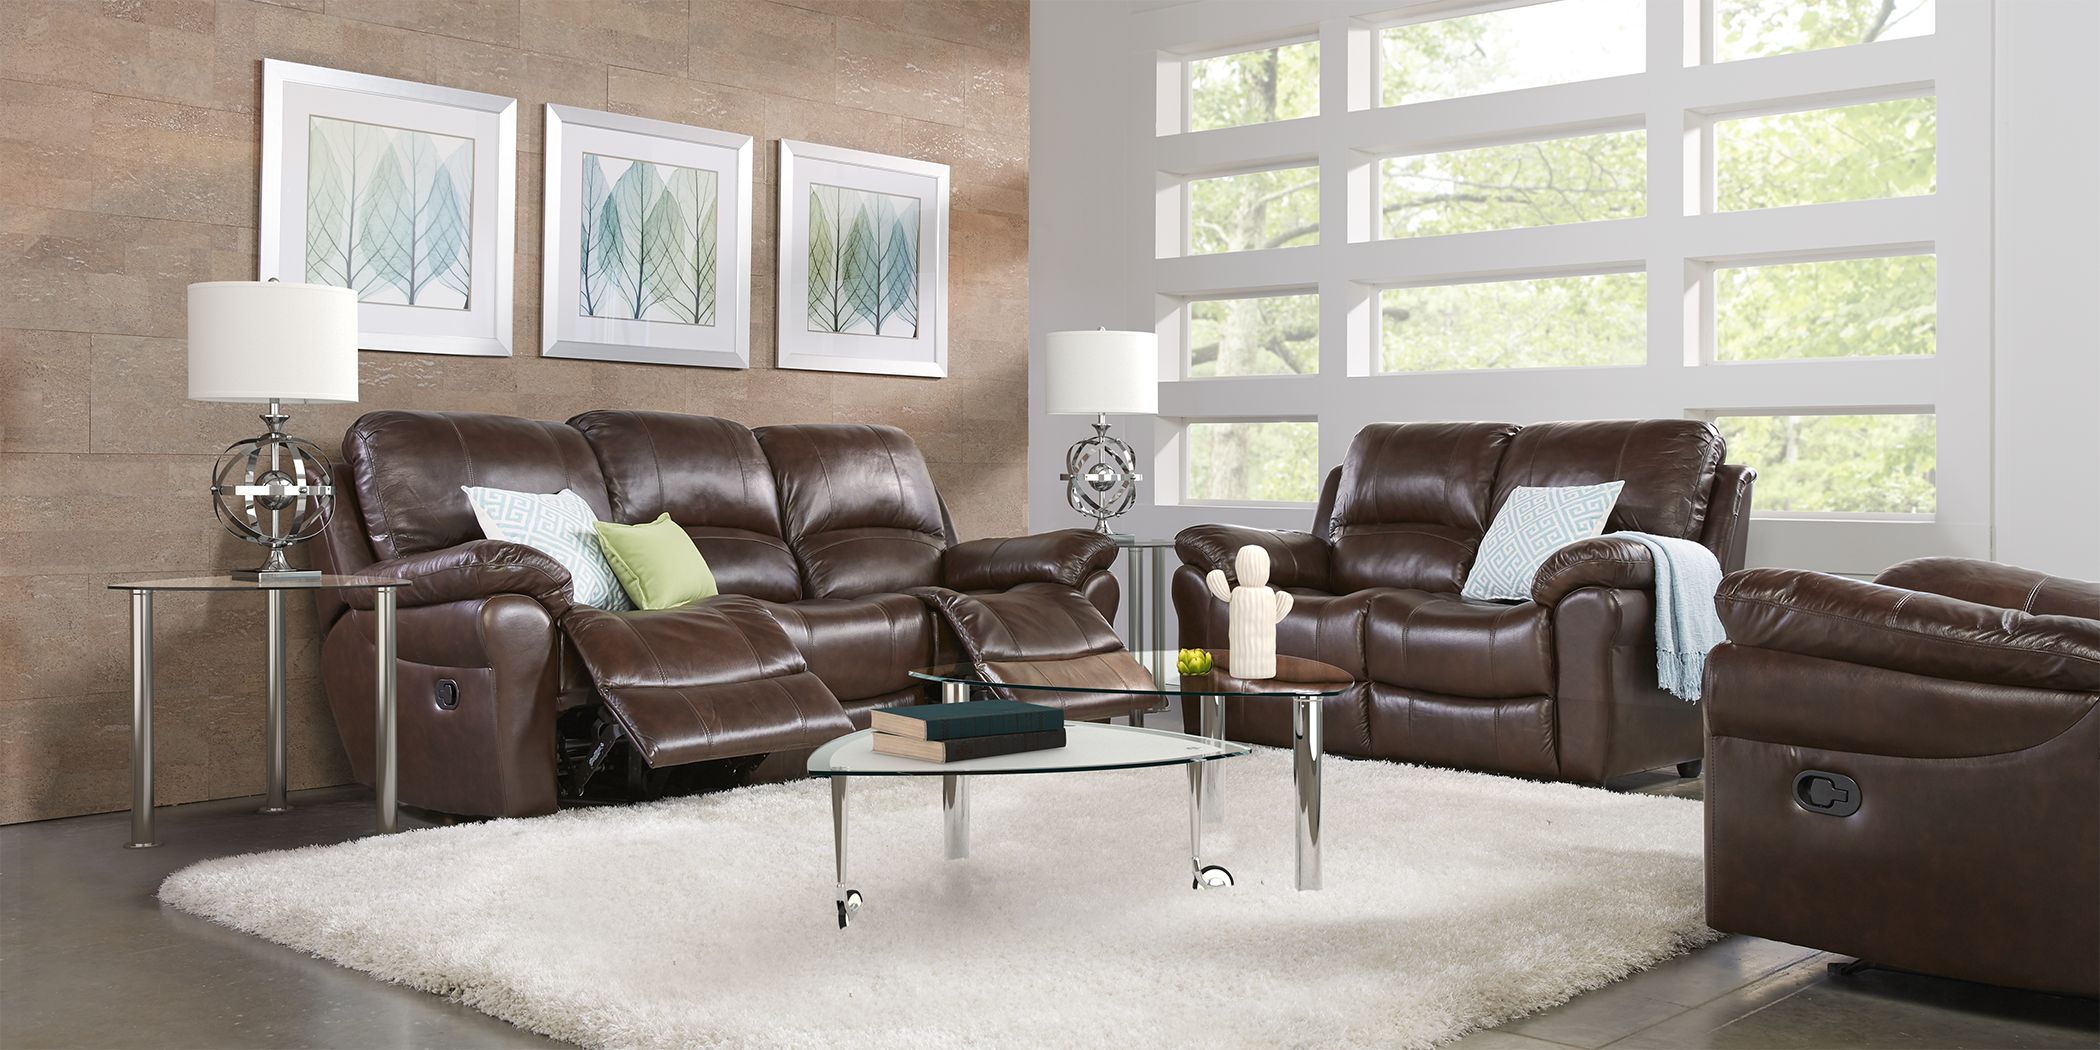 vercelli brown leather reclining sofa reviews